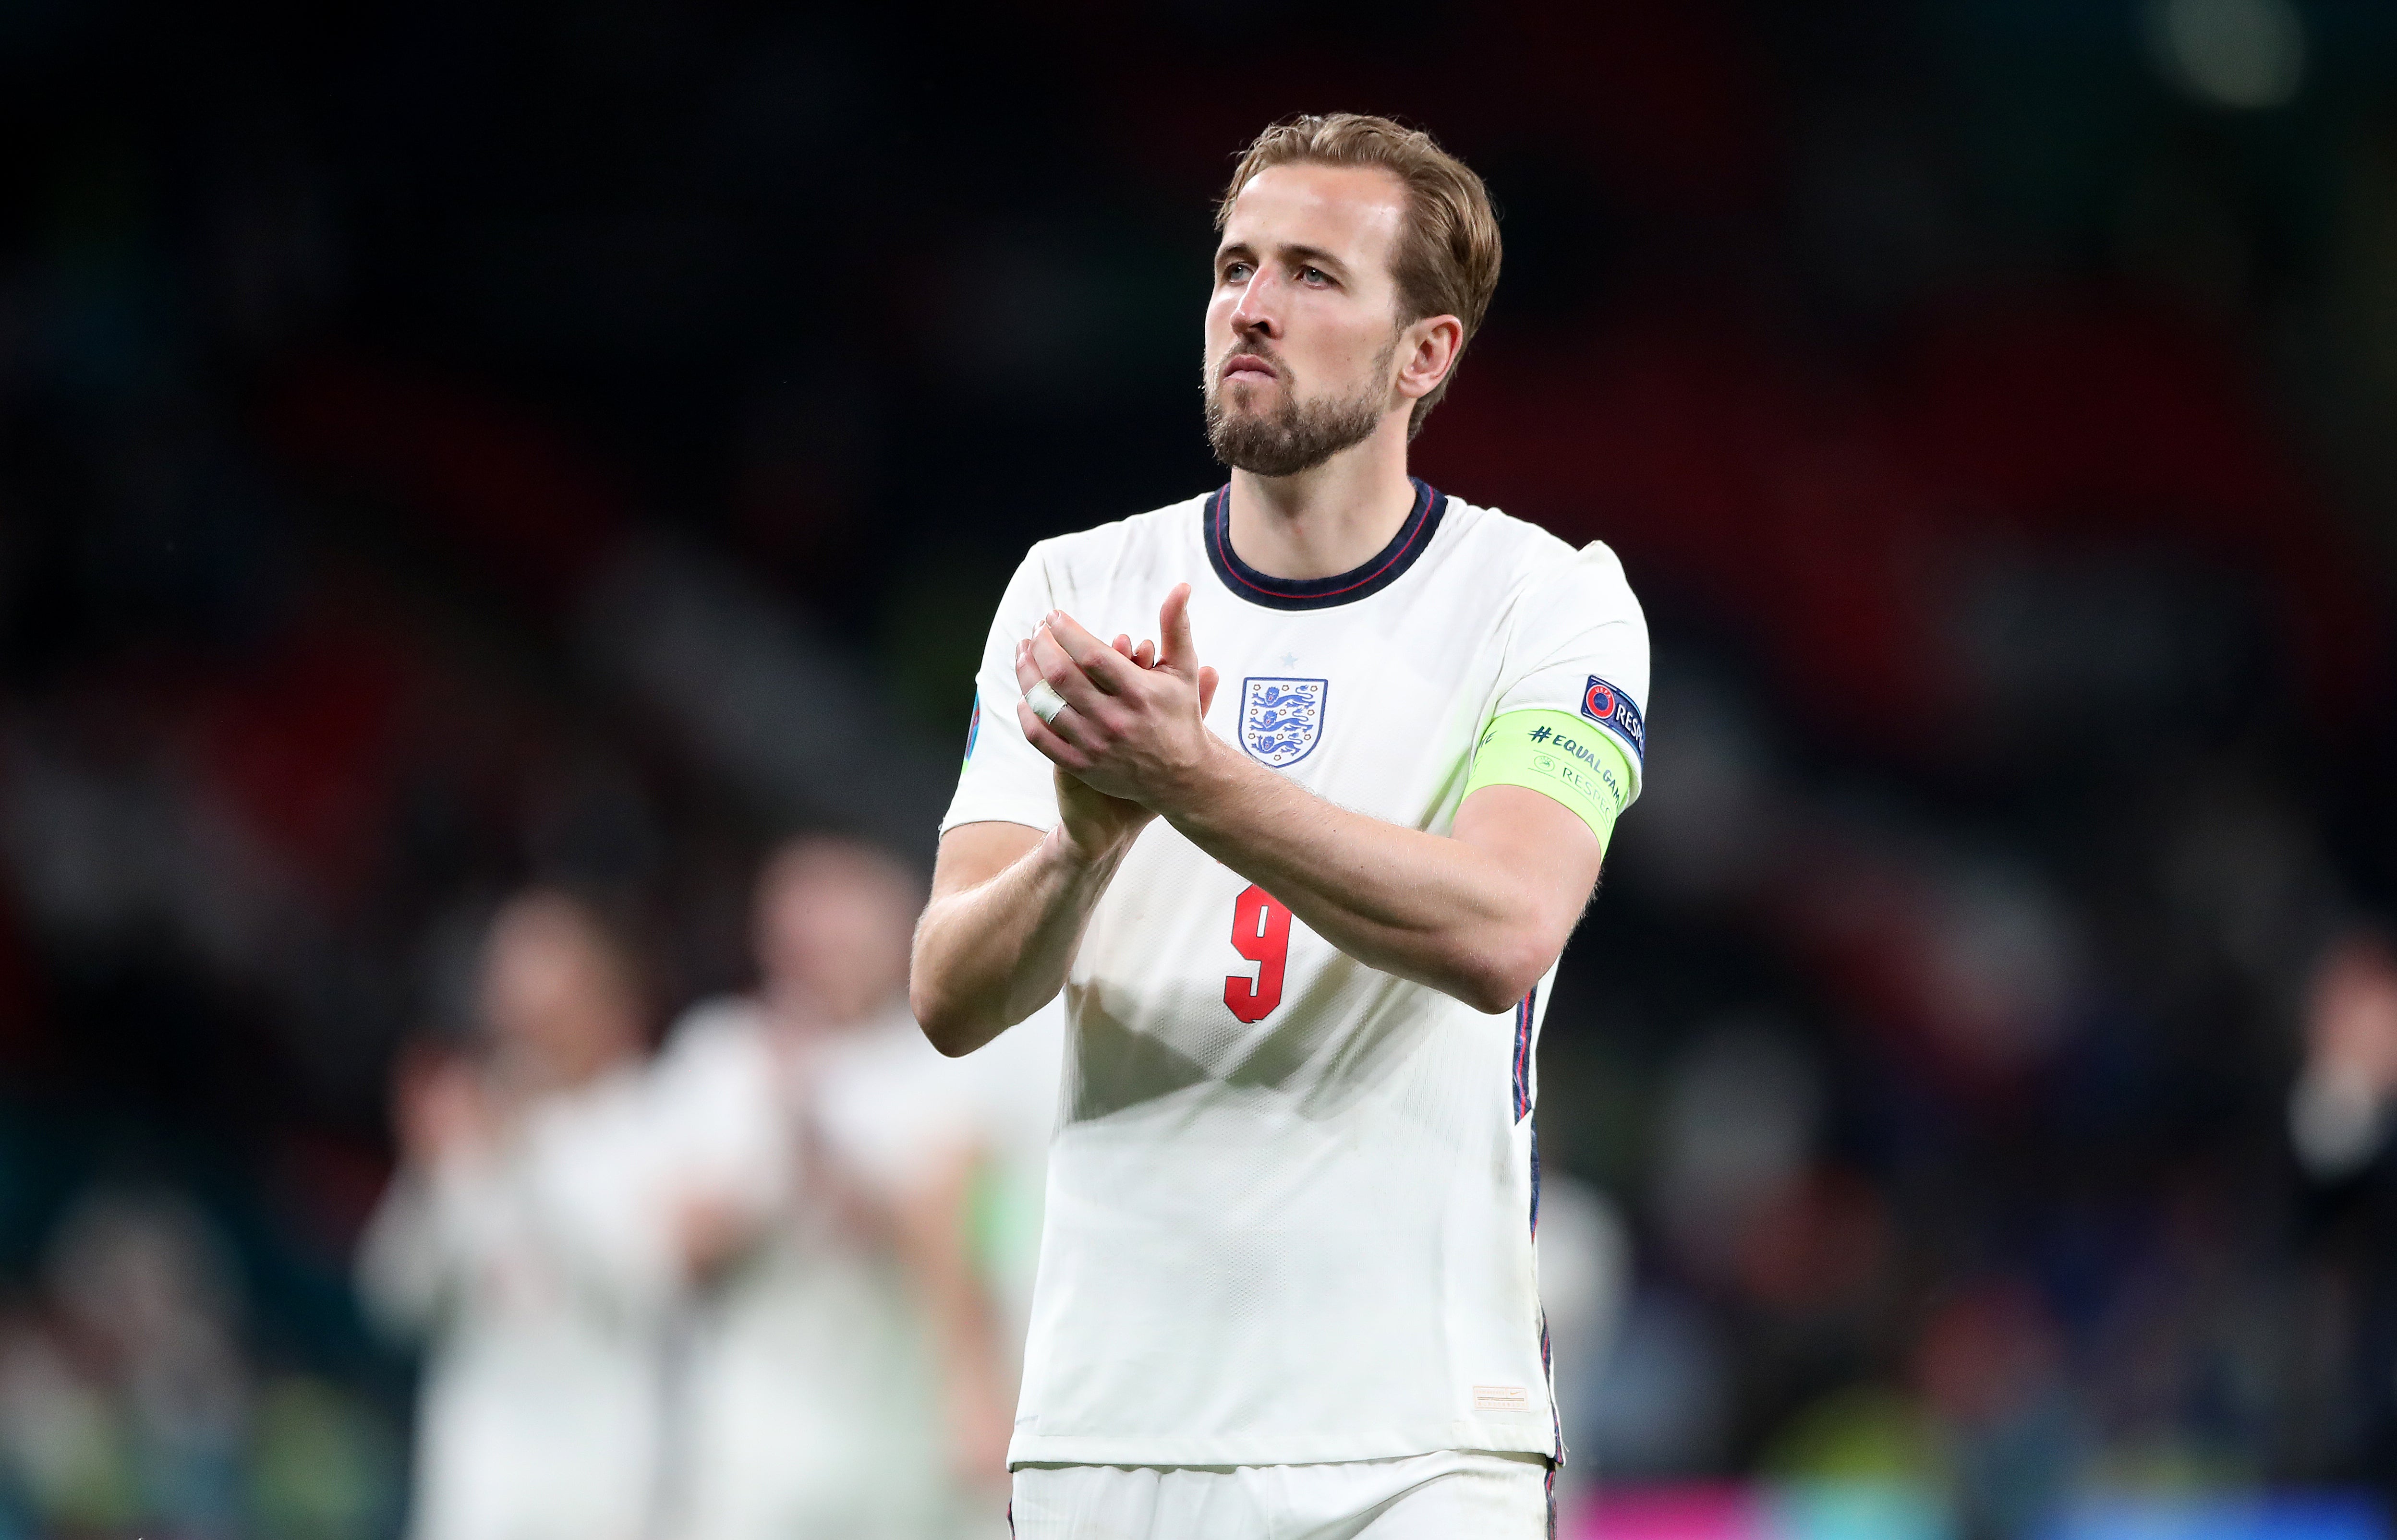 Kane has been on holiday after his exertions with England at Euro 2020 (Nick Potts/PA)